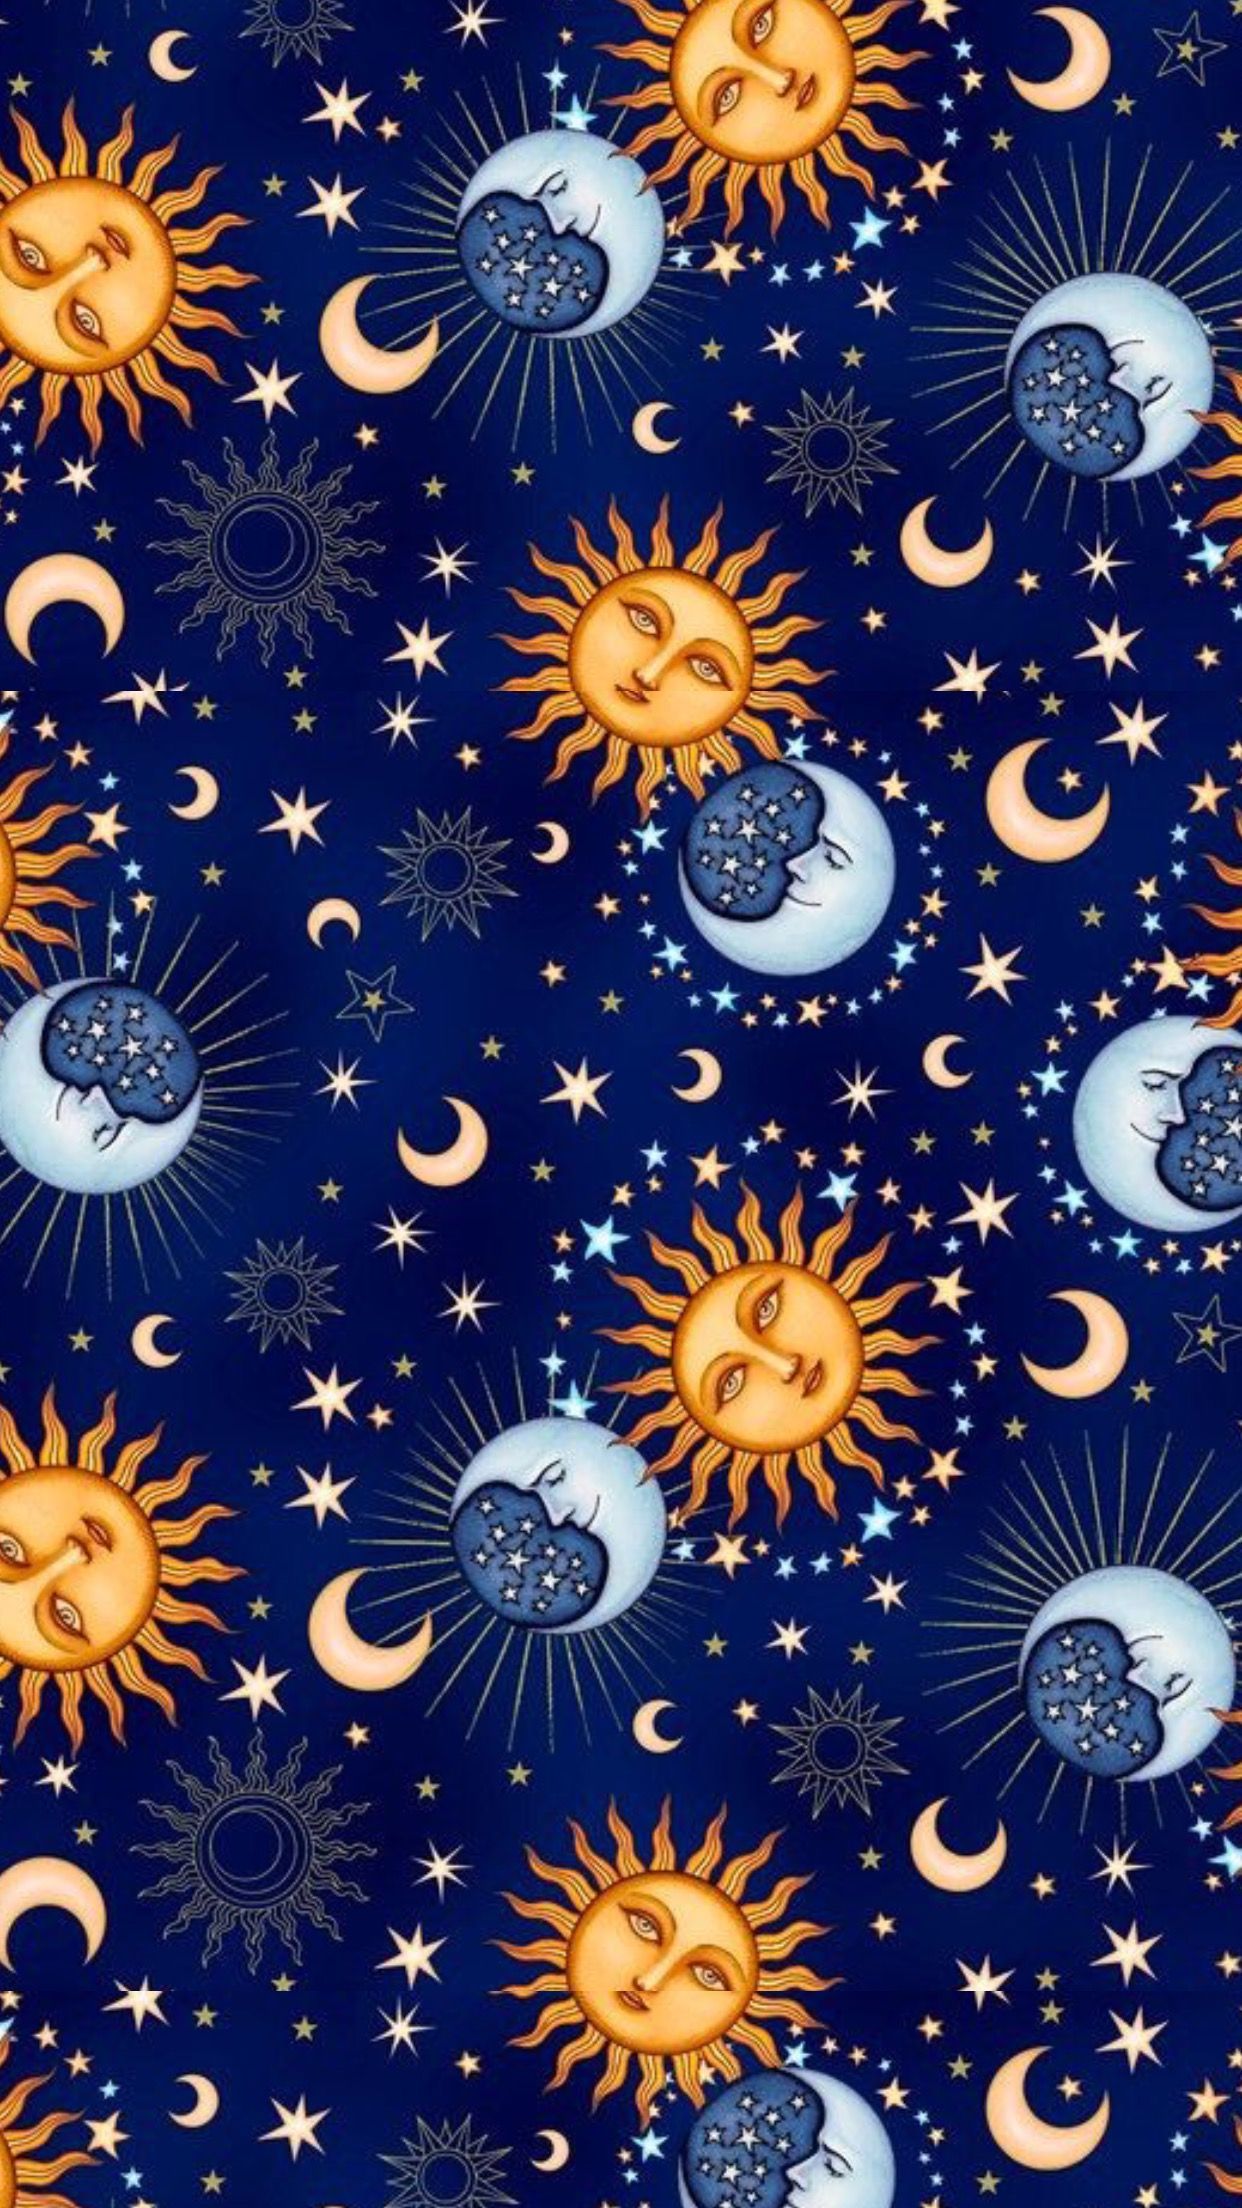 Sun and moon wallpaper for your phone or desktop background - Moon, pattern, sunlight, sun, Goblincore